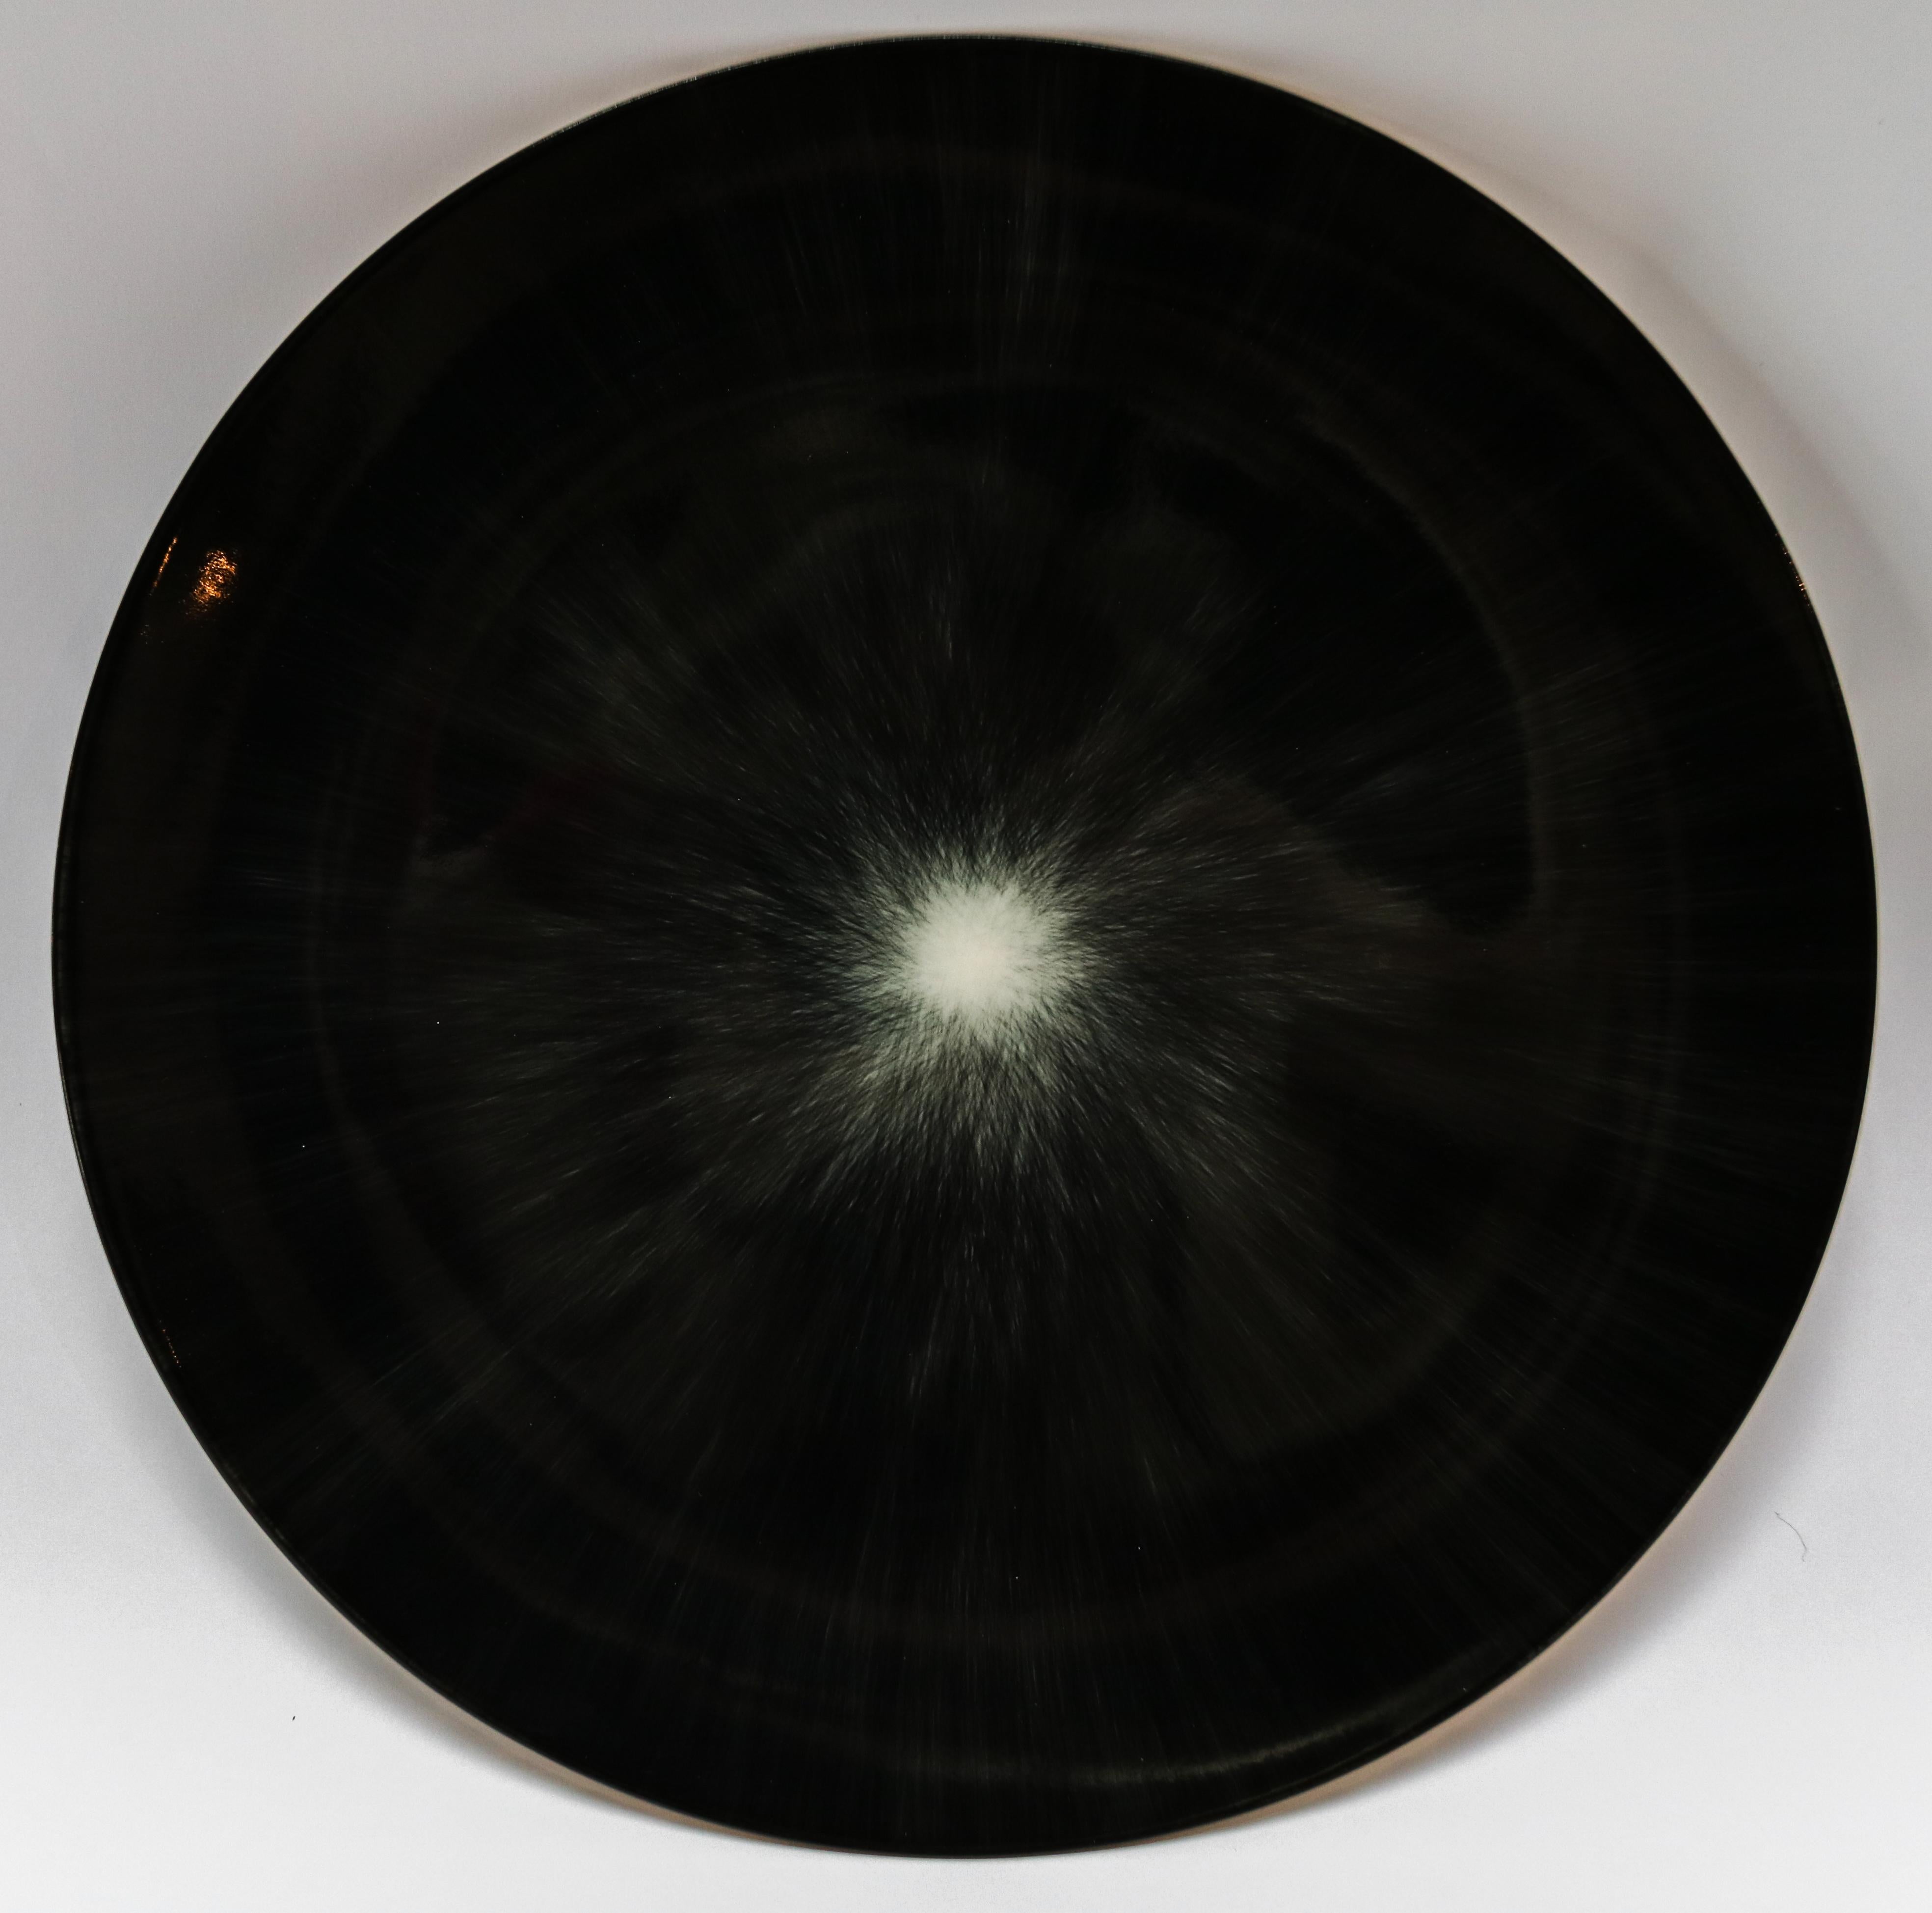 Ann Demeulemeester for Serax Dé dinner plate / charger in black / off white. Hand painted with a starburst pattern.  28cm diameter x 1.8 cm high. Must be purchased in quantities of two.